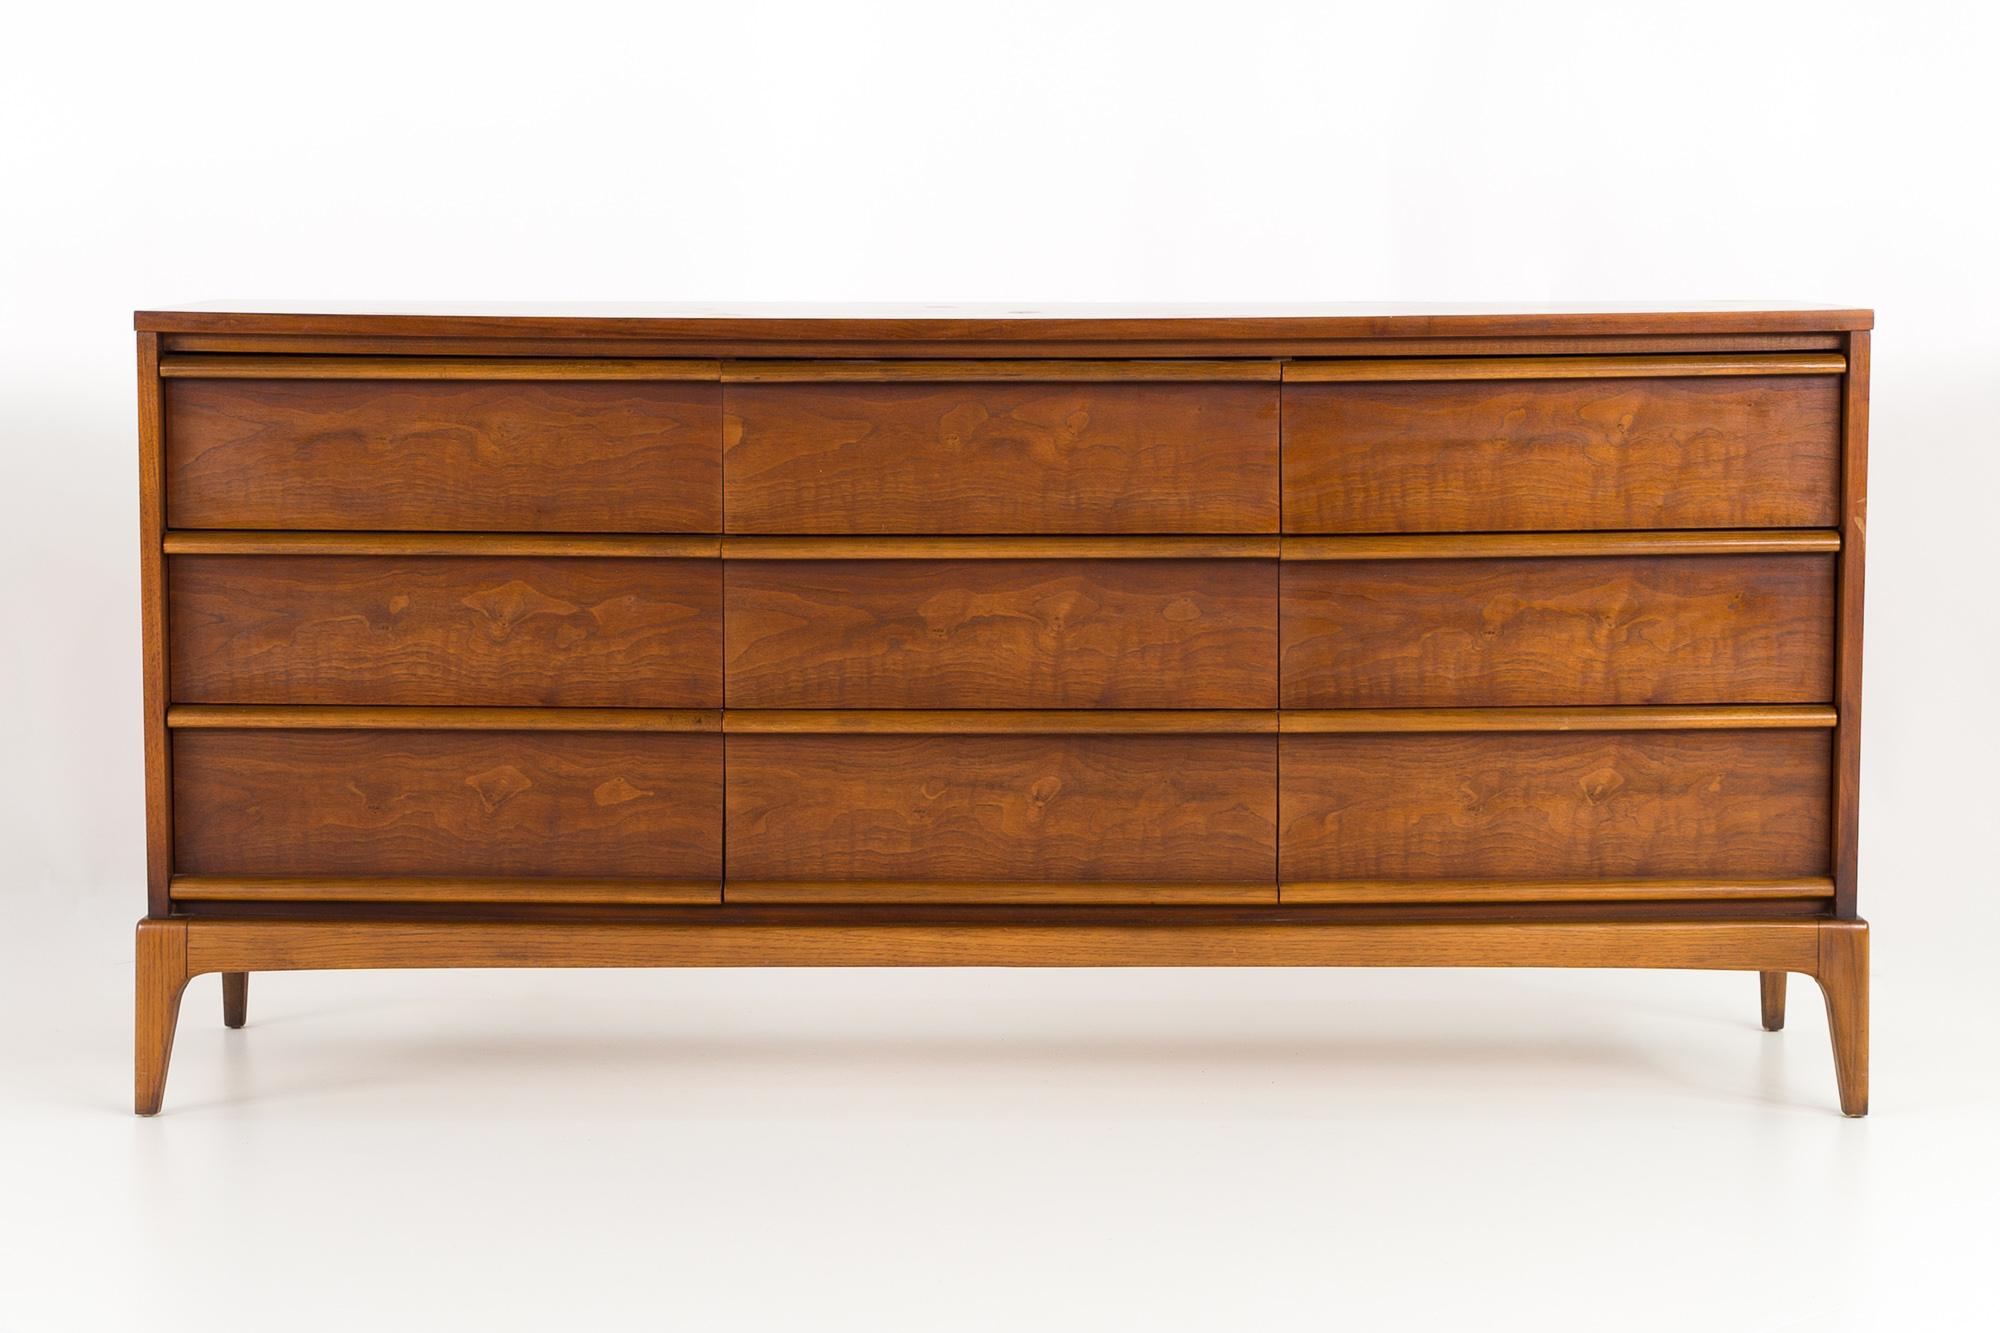 Lane Rhythm Paul McCobb style mid century 9 drawer lowboy dresser

Lowboy measures: 66.5 wide x 18 deep x 31.25 inches high

All pieces of furniture can be had in what we call restored vintage condition. That means the piece is restored upon